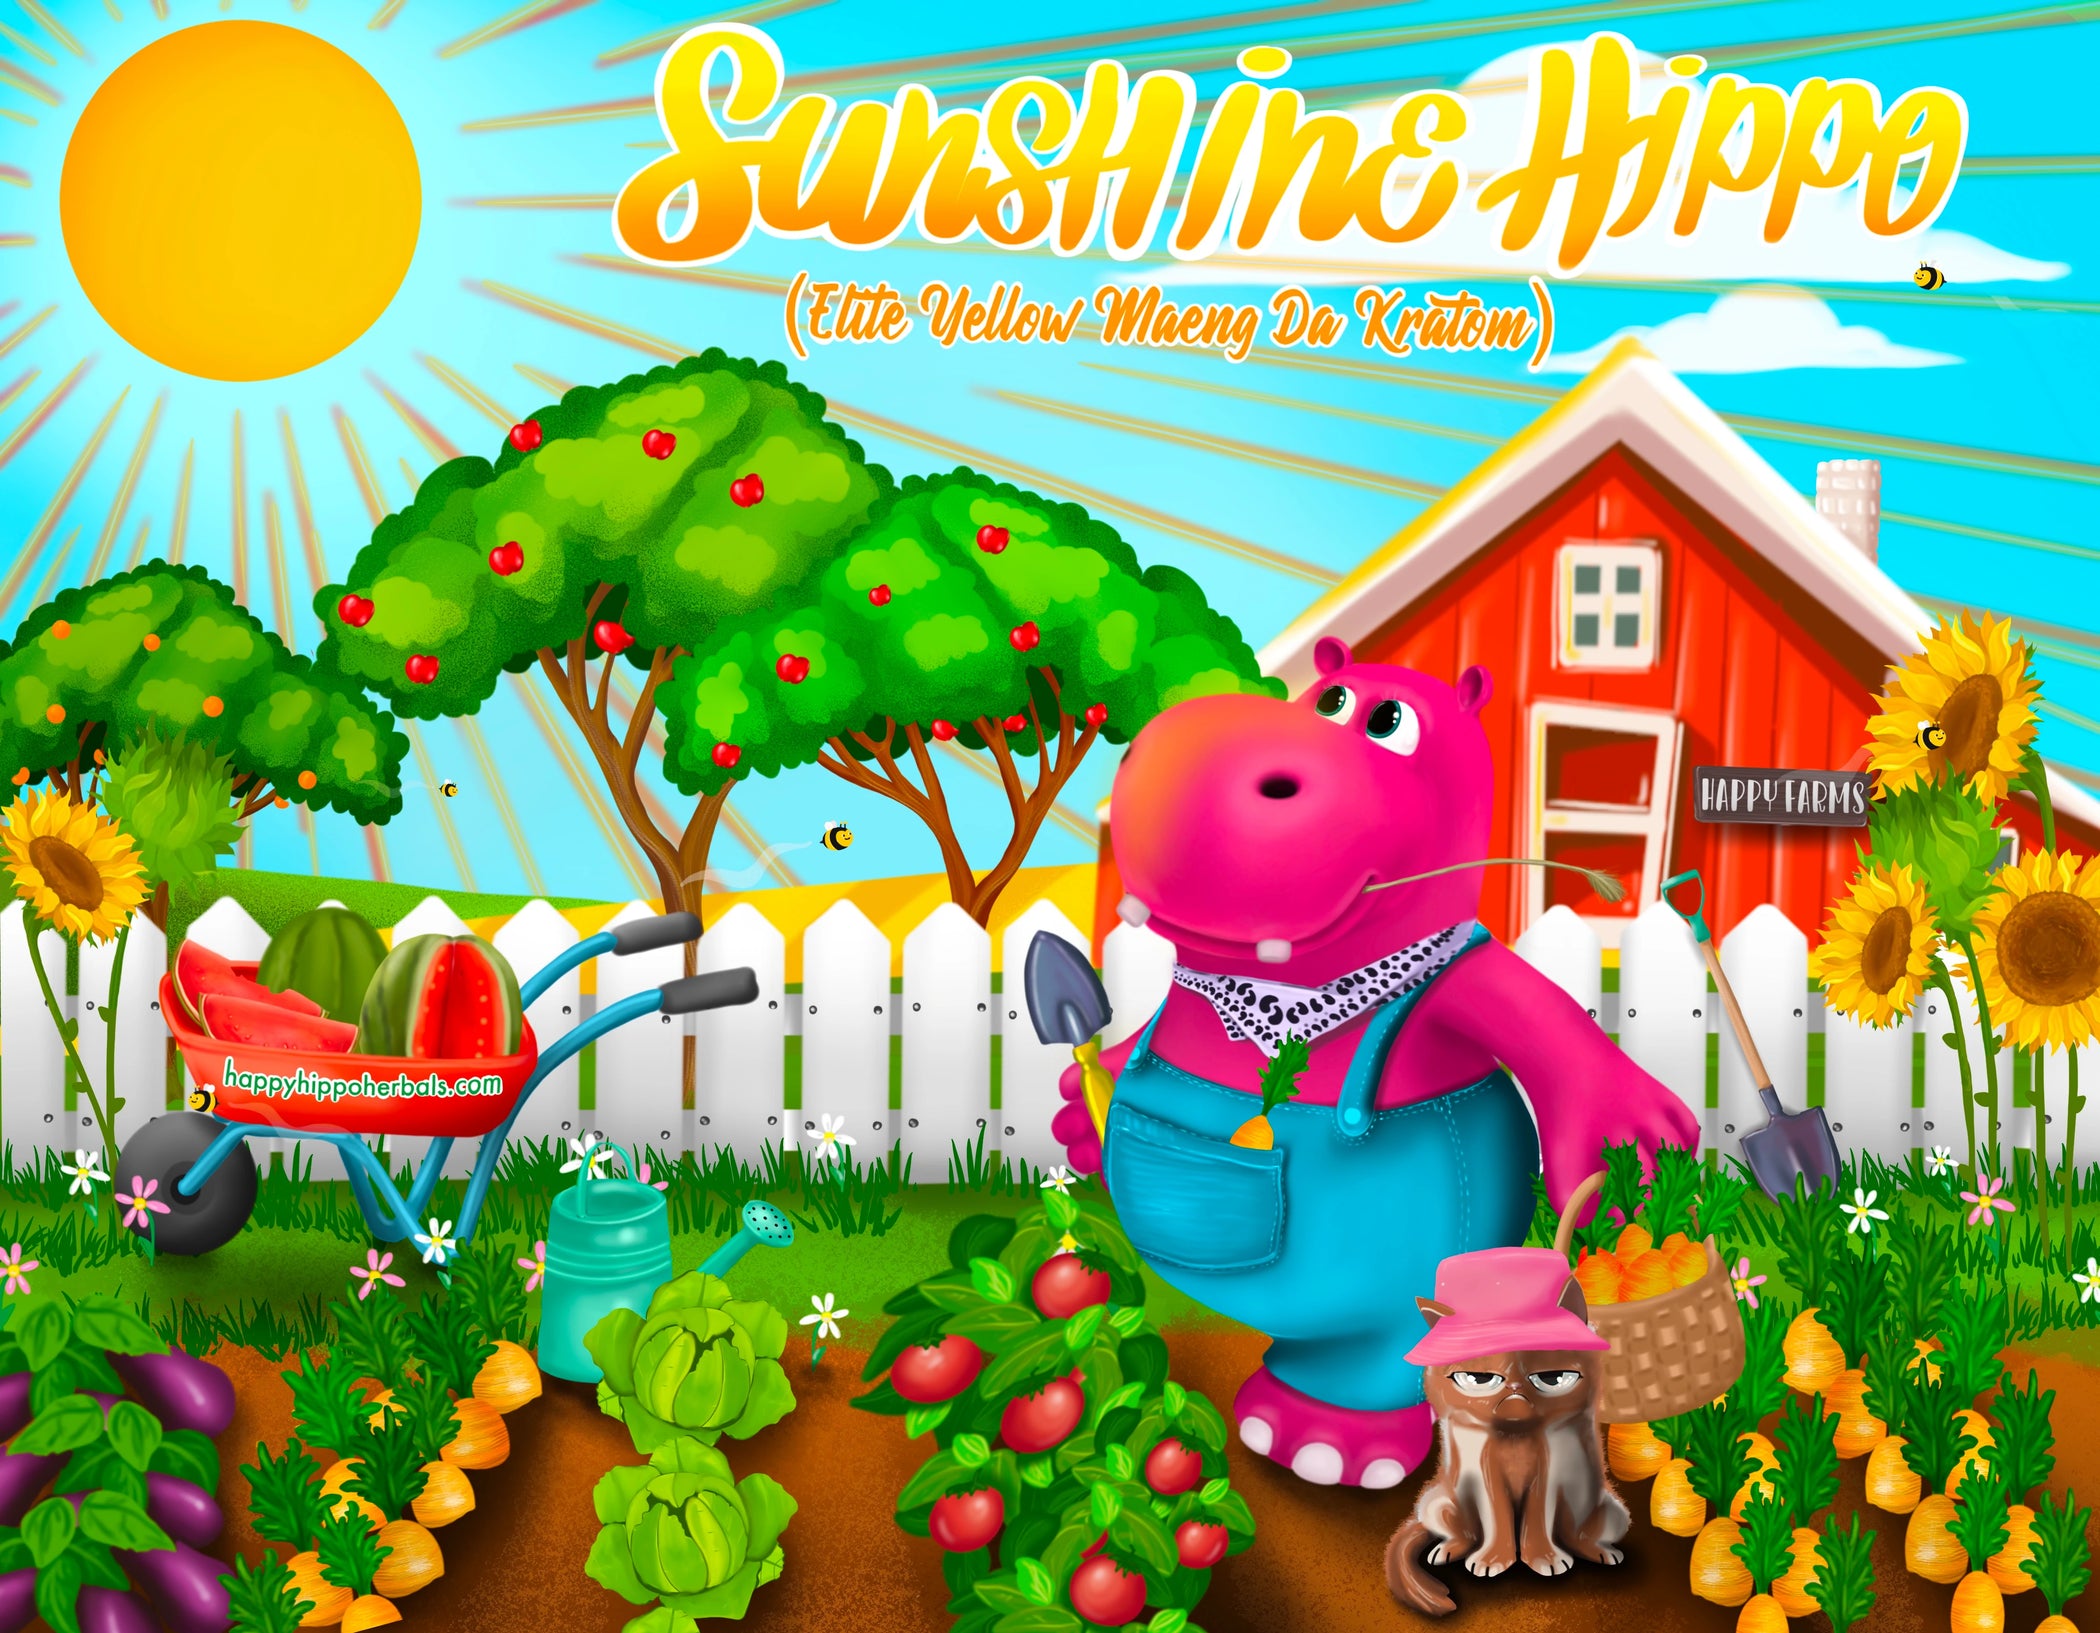 Graphic Designed image depicting Puddles the Hippo wearing overalls while using Yellow Maeng Da Kratom Powder (Sunshine Hippo), while feeling the joyful spirit kratom effects and tending to his garden in the bright sunshine